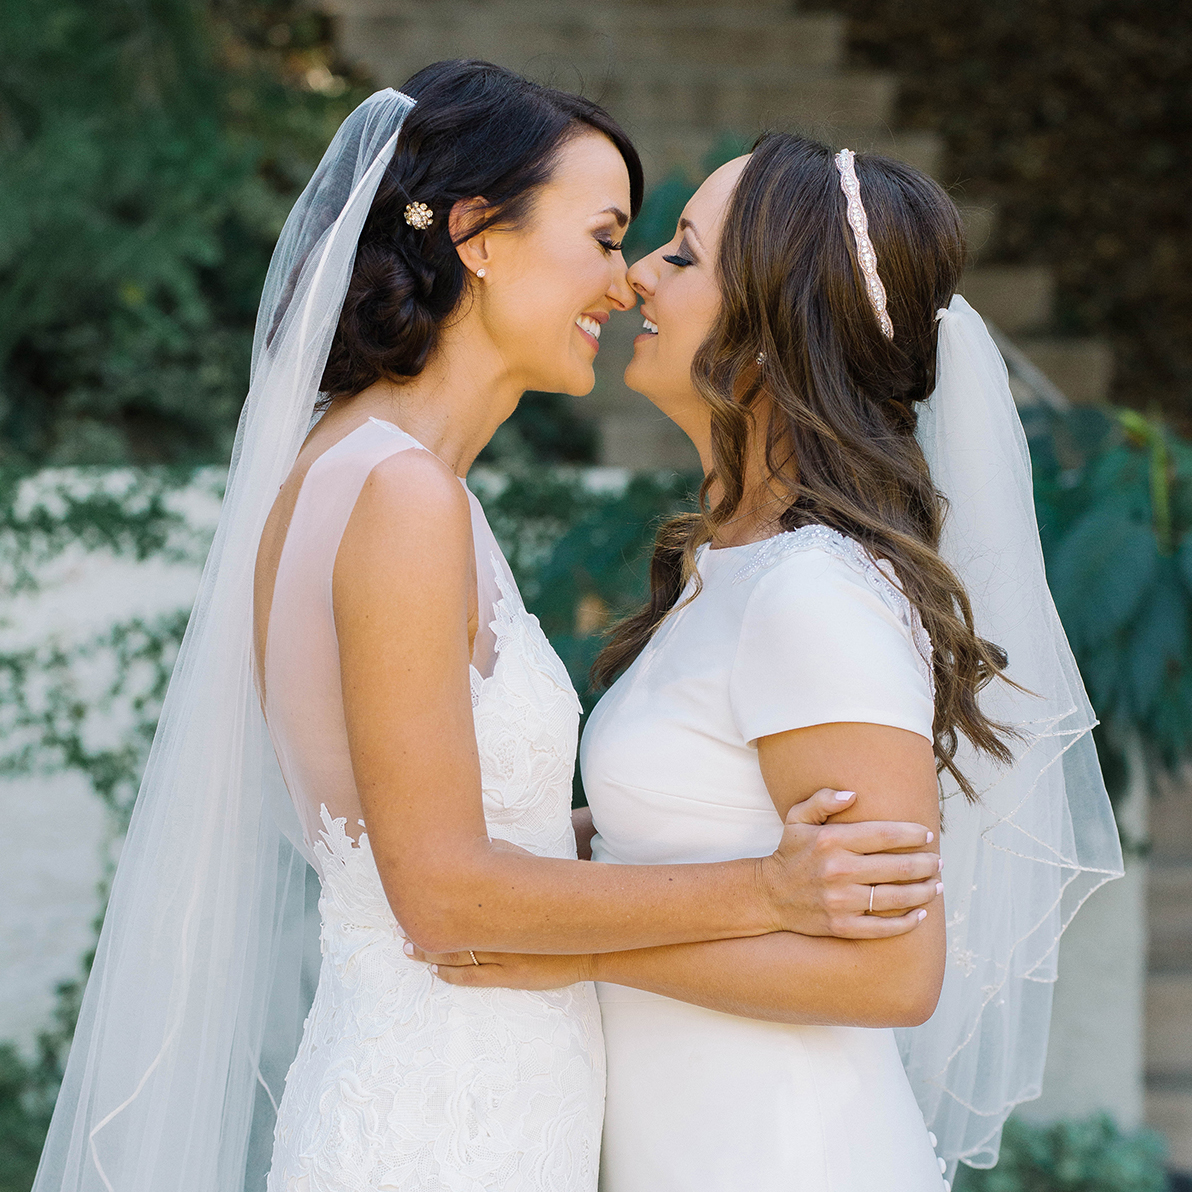 Two women are about to kiss on their wedding day.